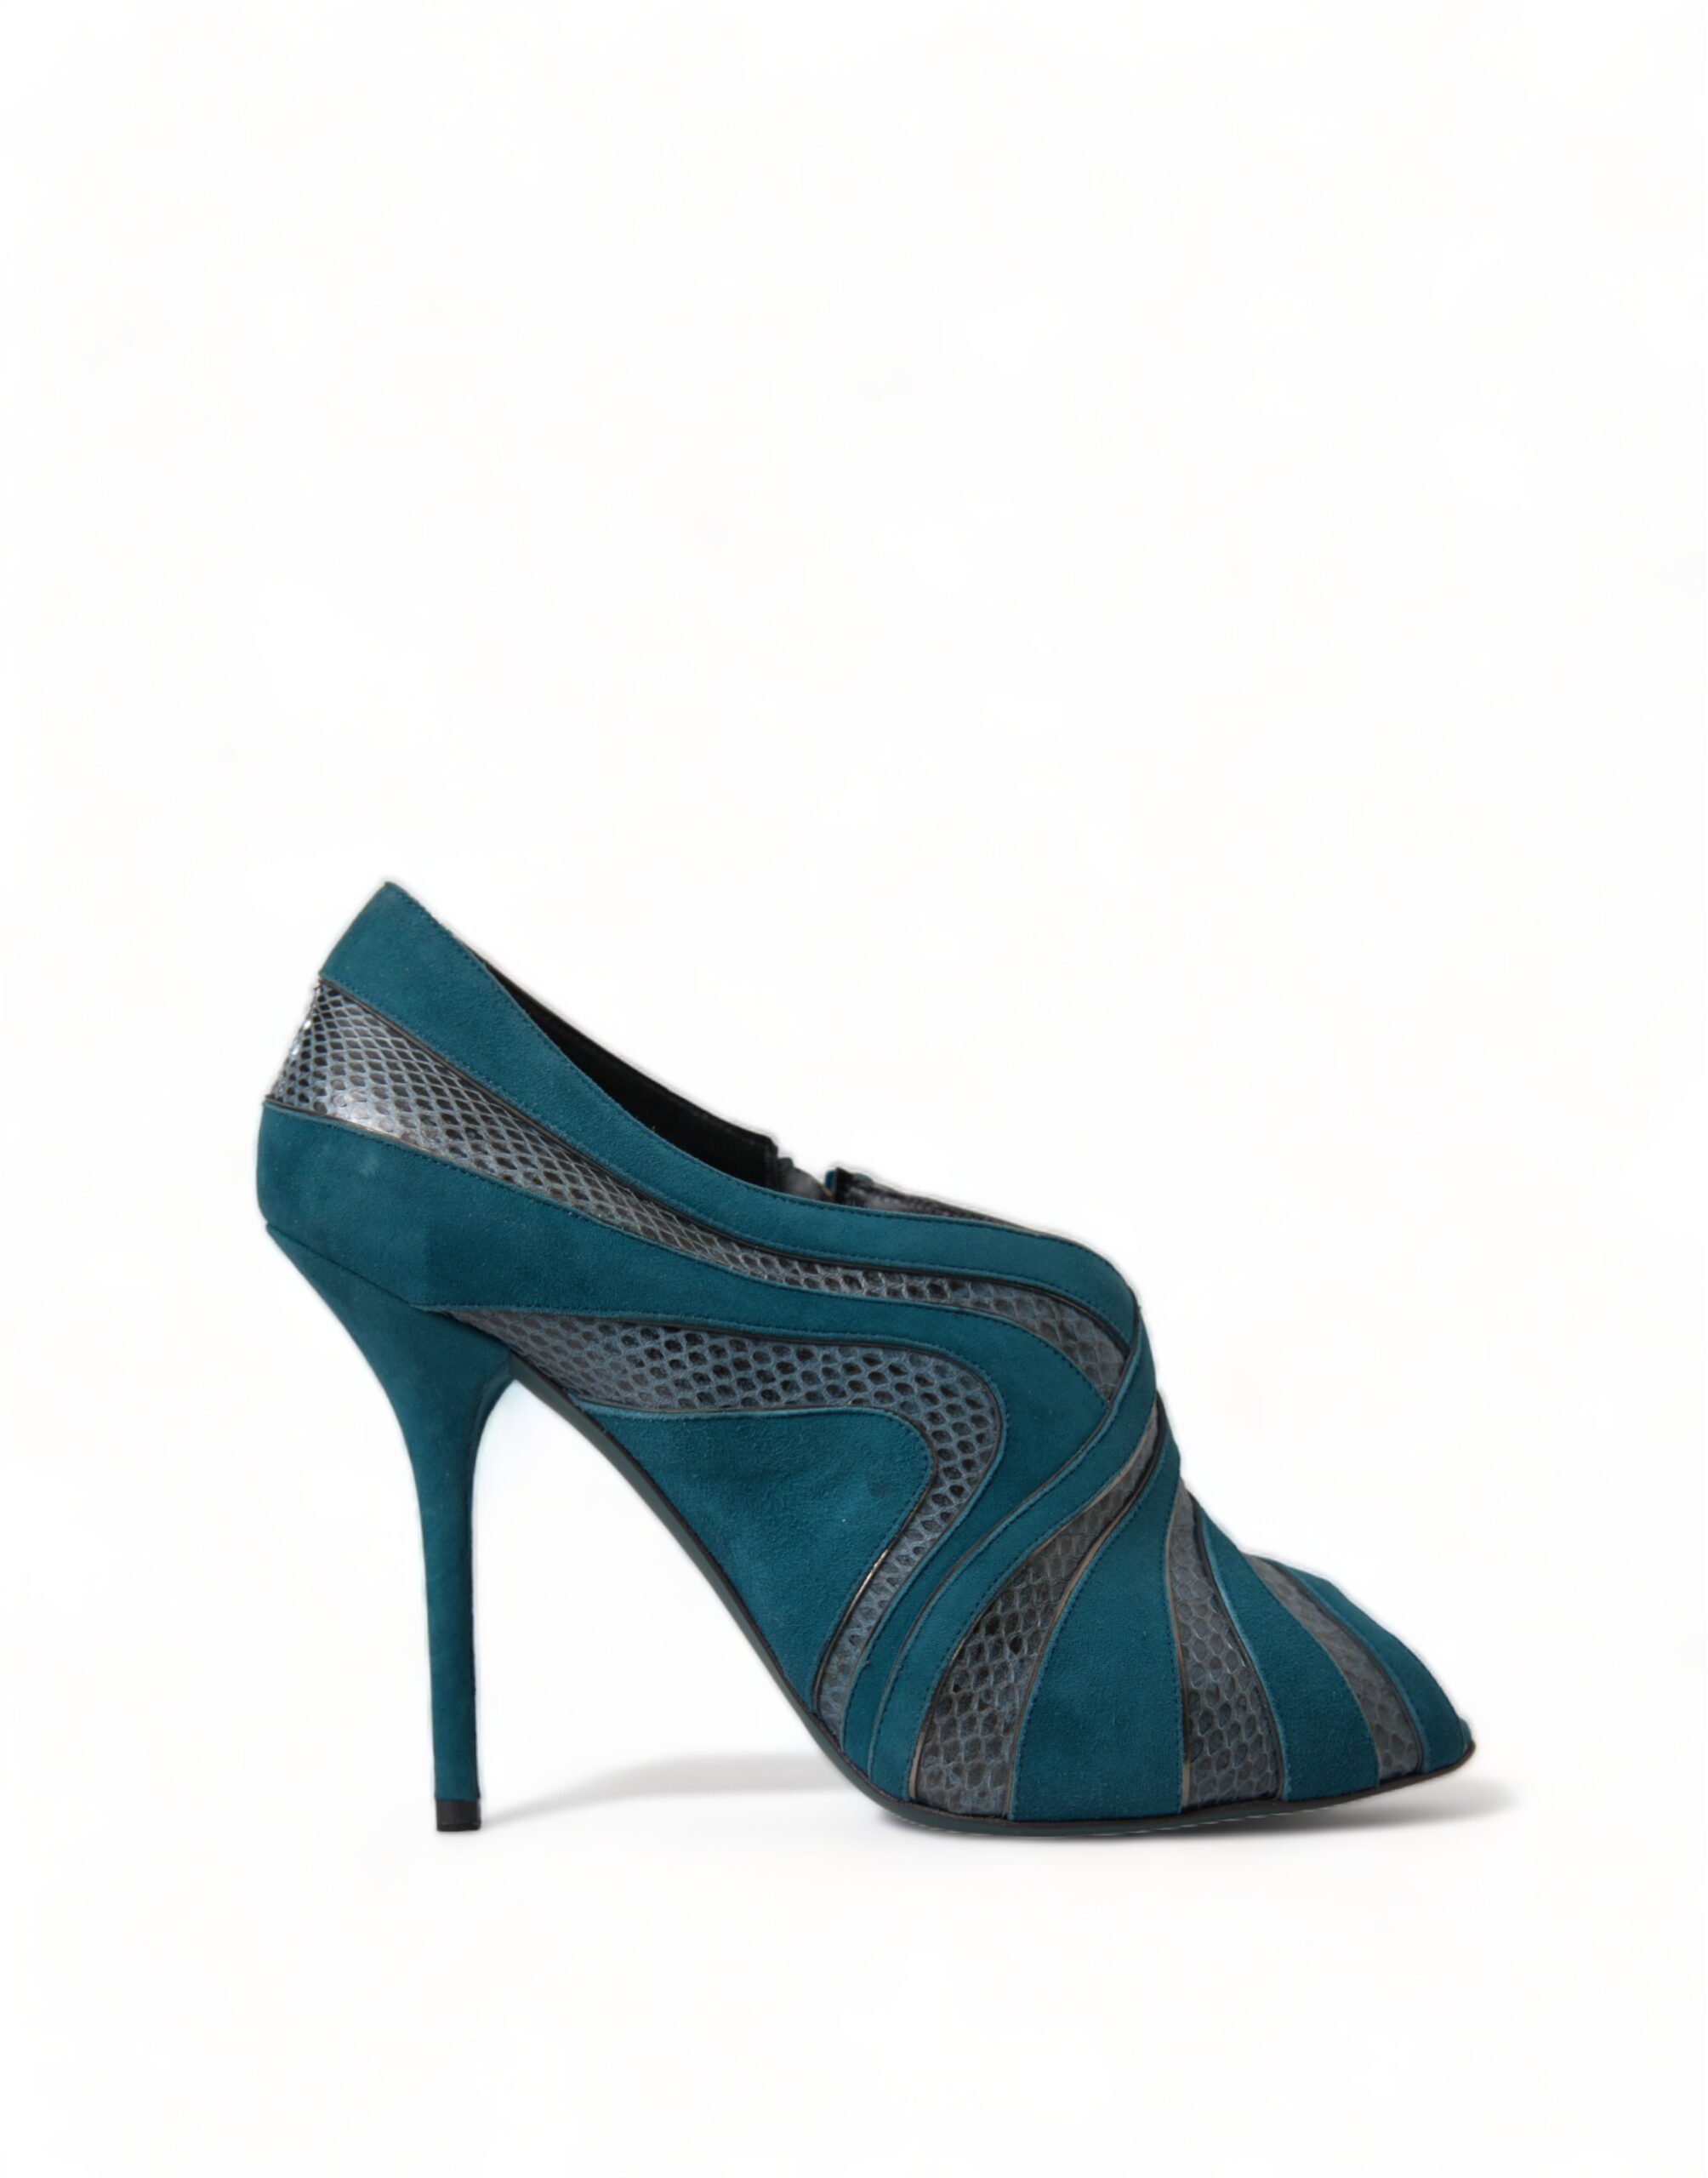 Buy Turquoise Heels Online In India - Etsy India